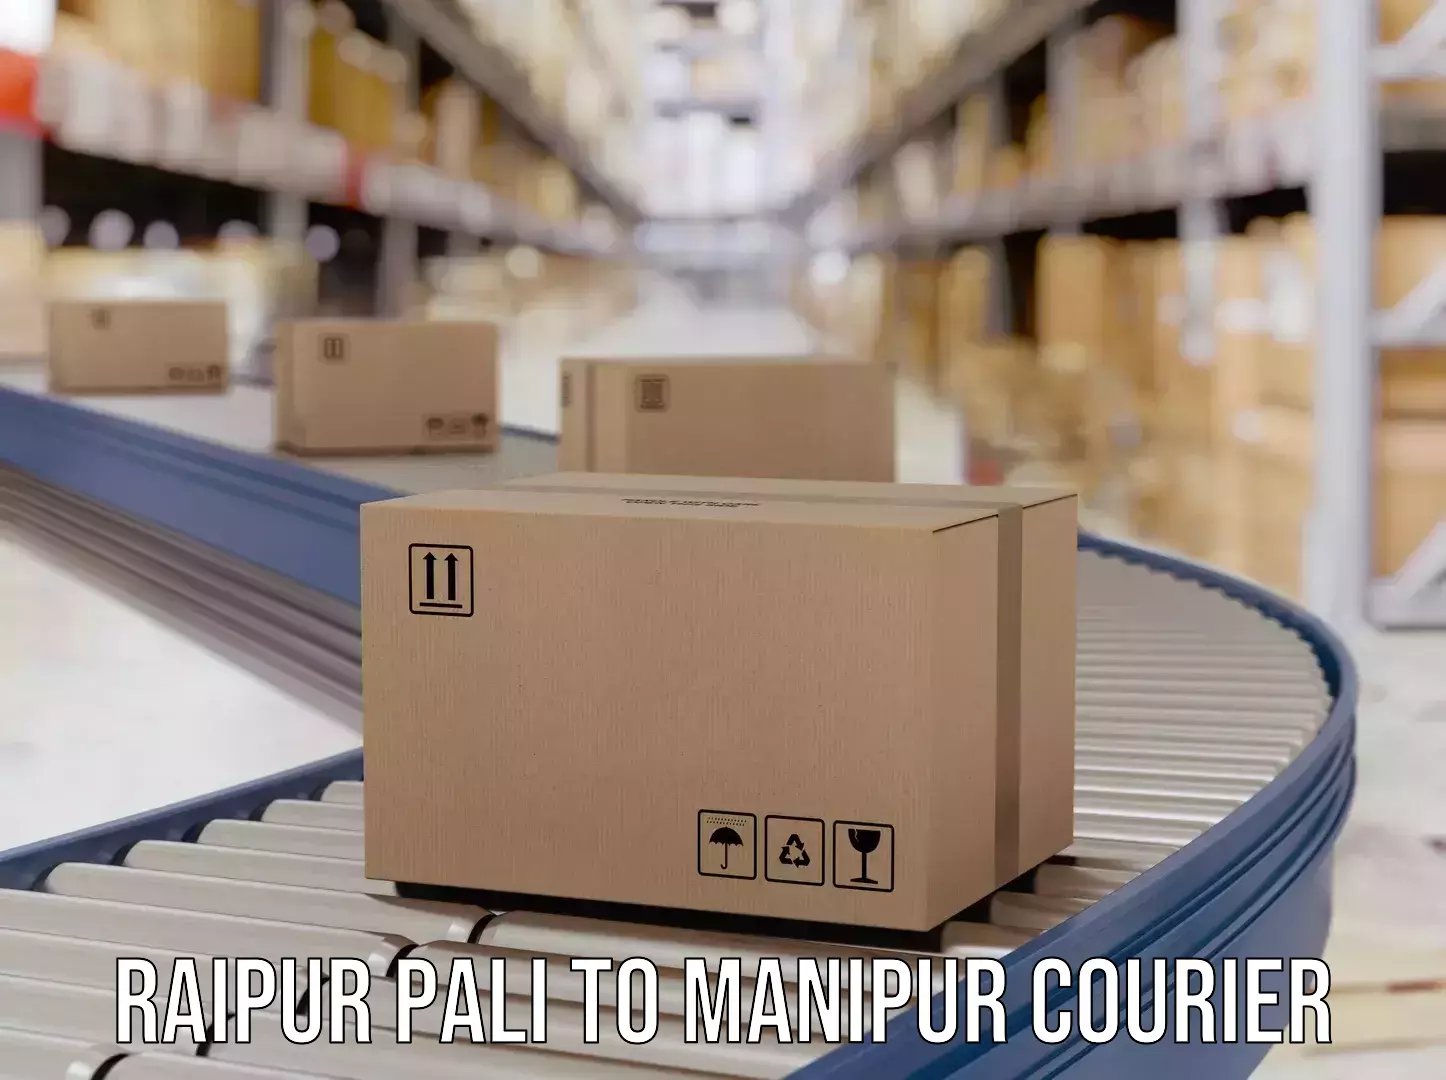 Residential courier service Raipur Pali to Manipur